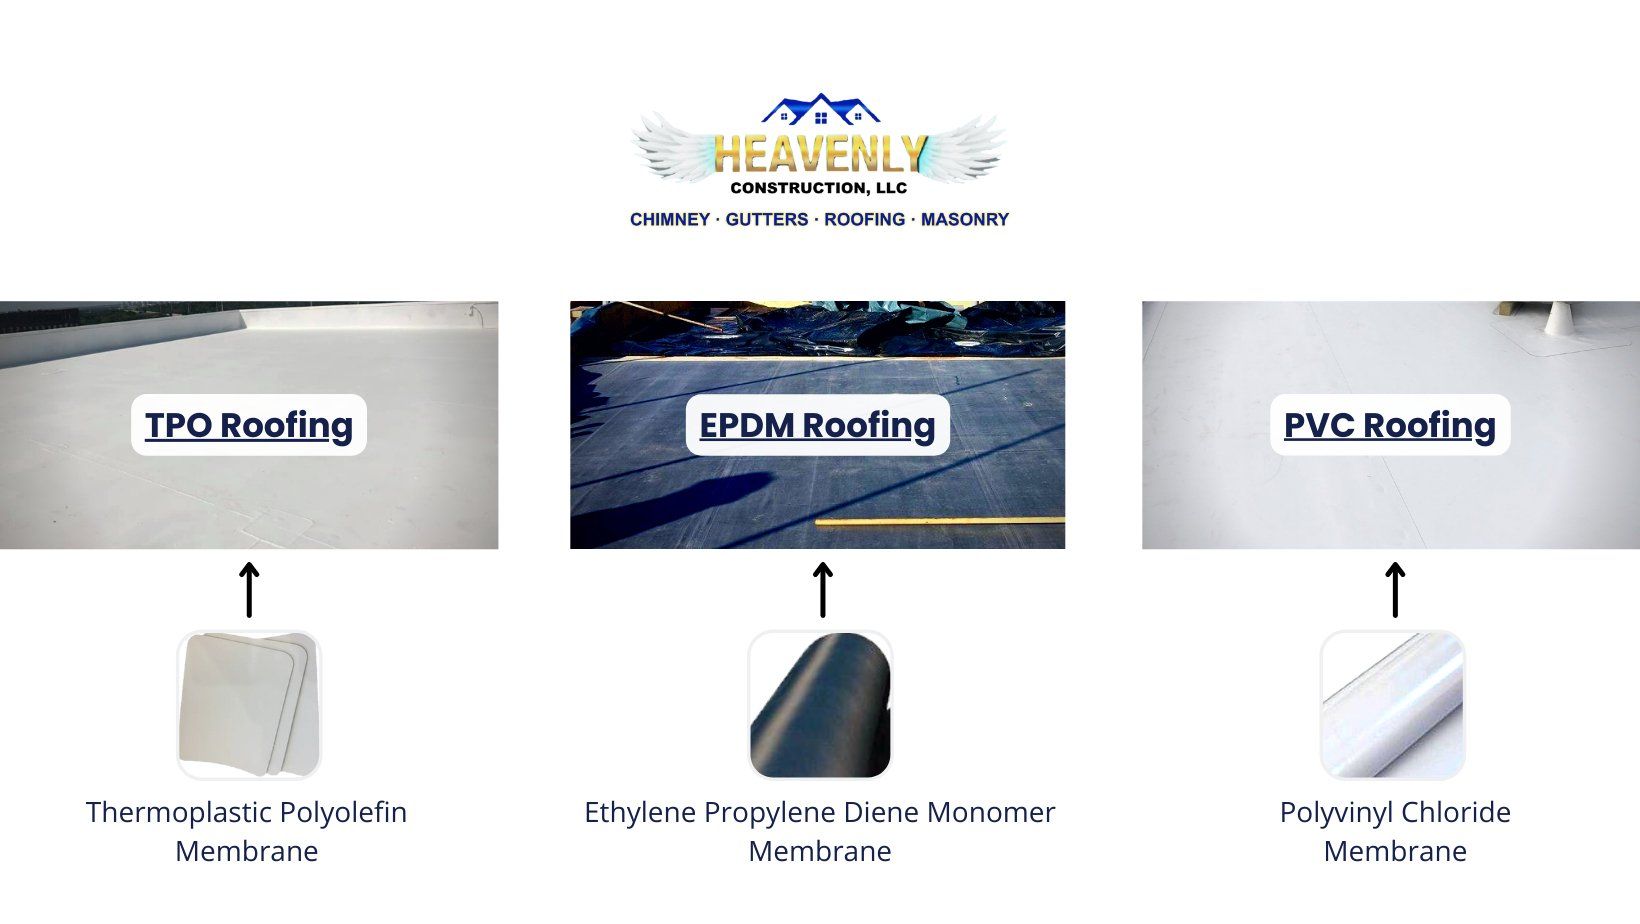 TPO, EPDM, and PVC flat roof infographic.